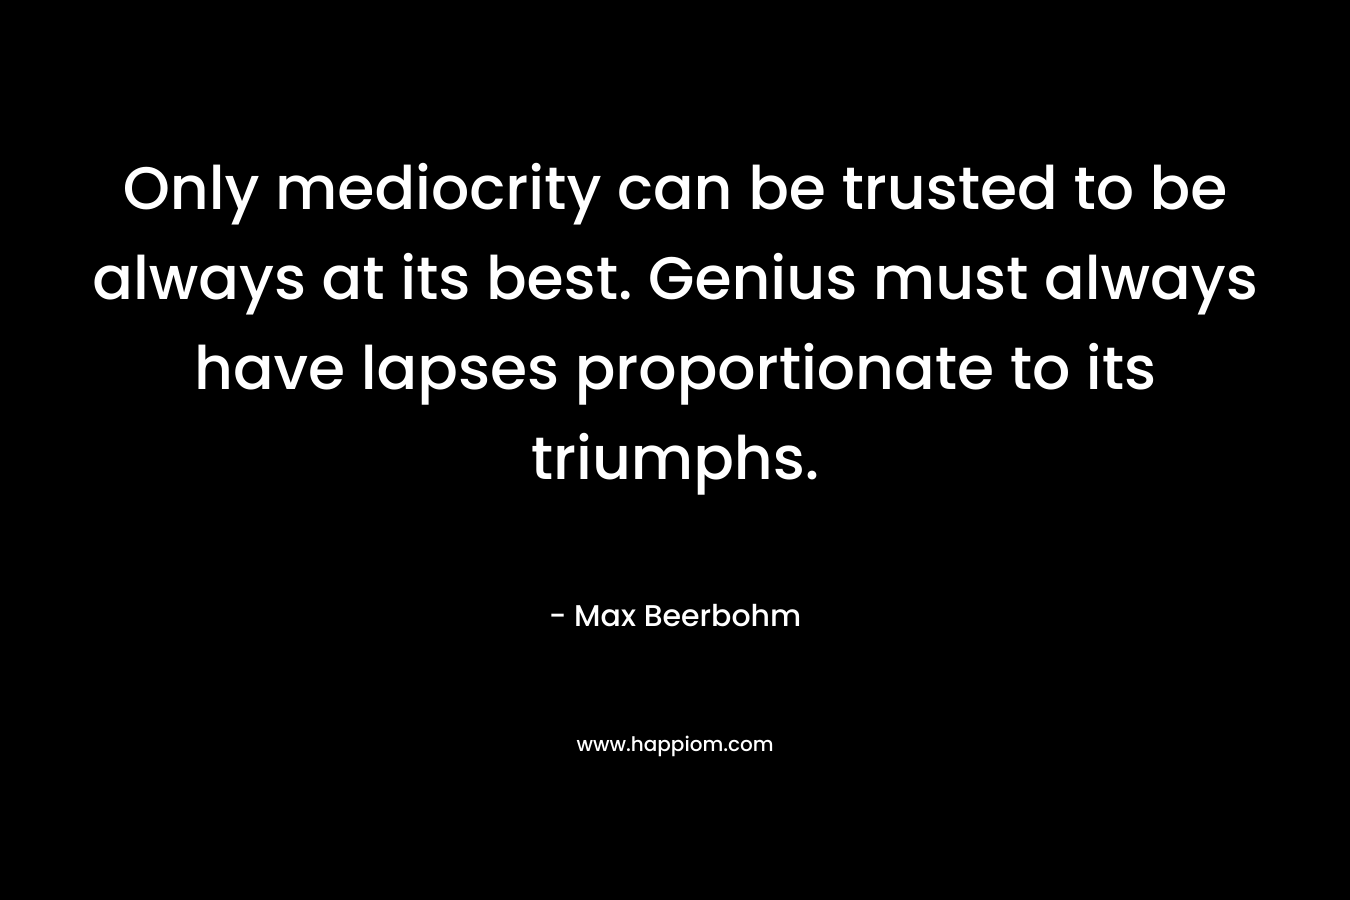 Only mediocrity can be trusted to be always at its best. Genius must always have lapses proportionate to its triumphs. – Max Beerbohm